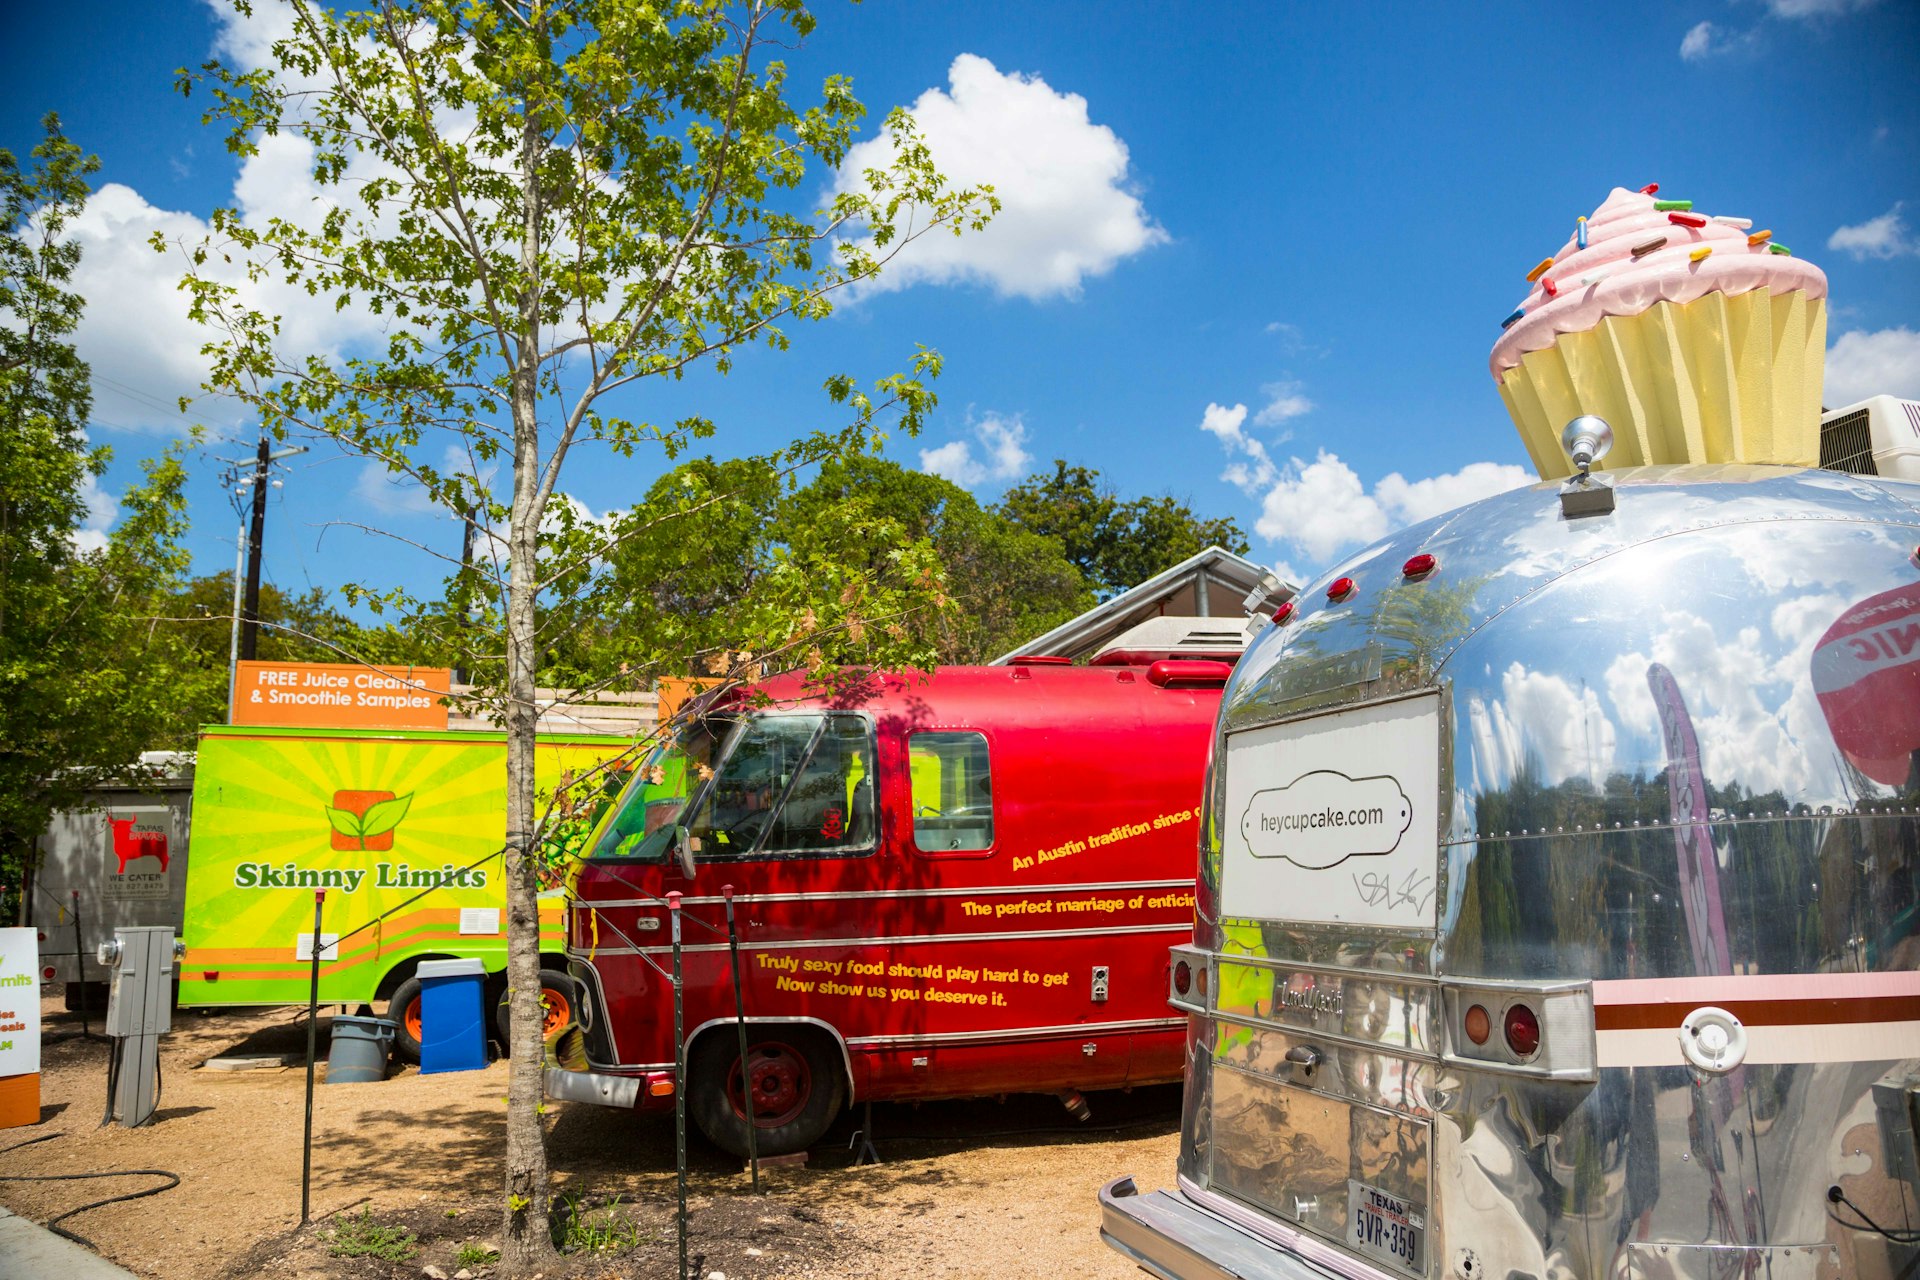 Food trucks lined up in the Barton Springs Picnic area. Image by Kylie McLaughlin / Getty